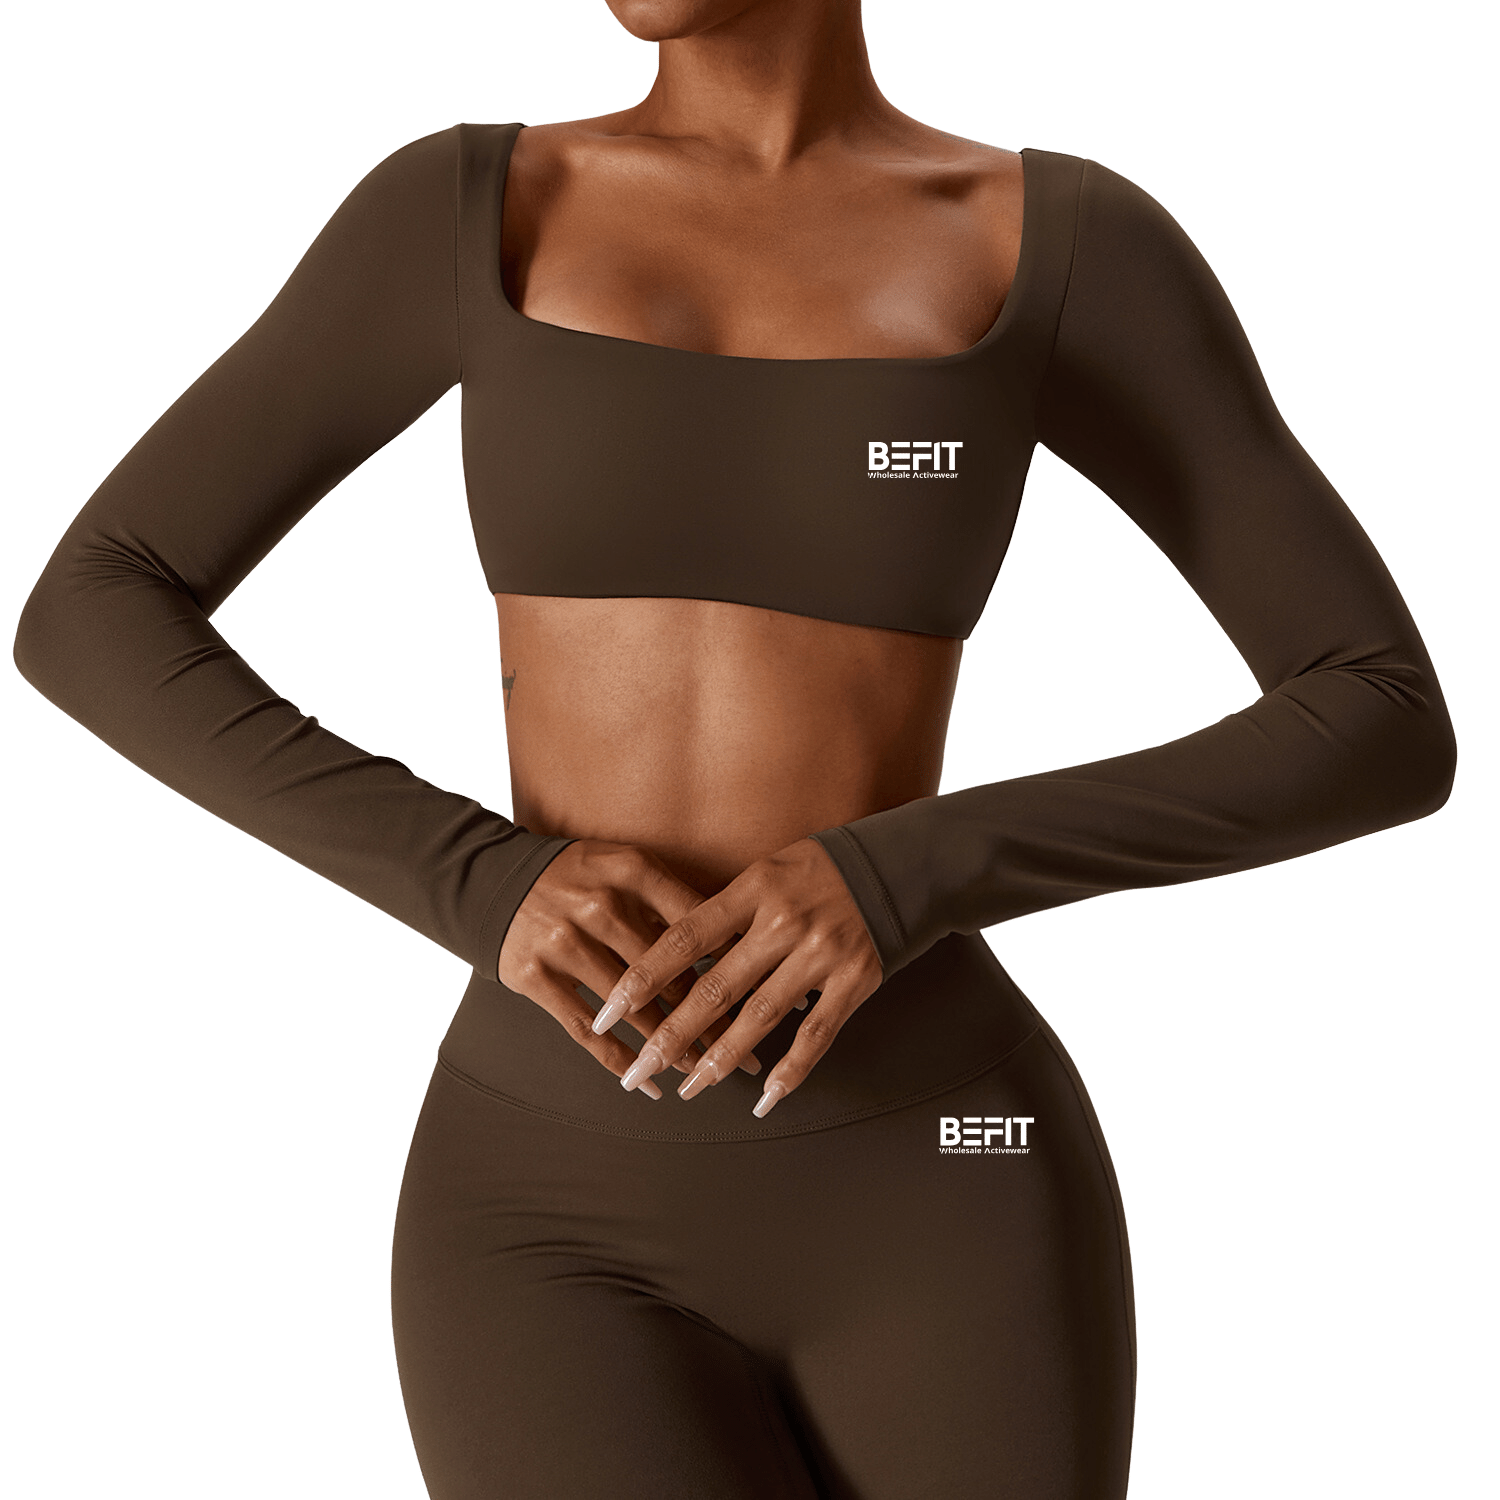 Women's Wholesale Tight Fitness Long-Sleeve Top